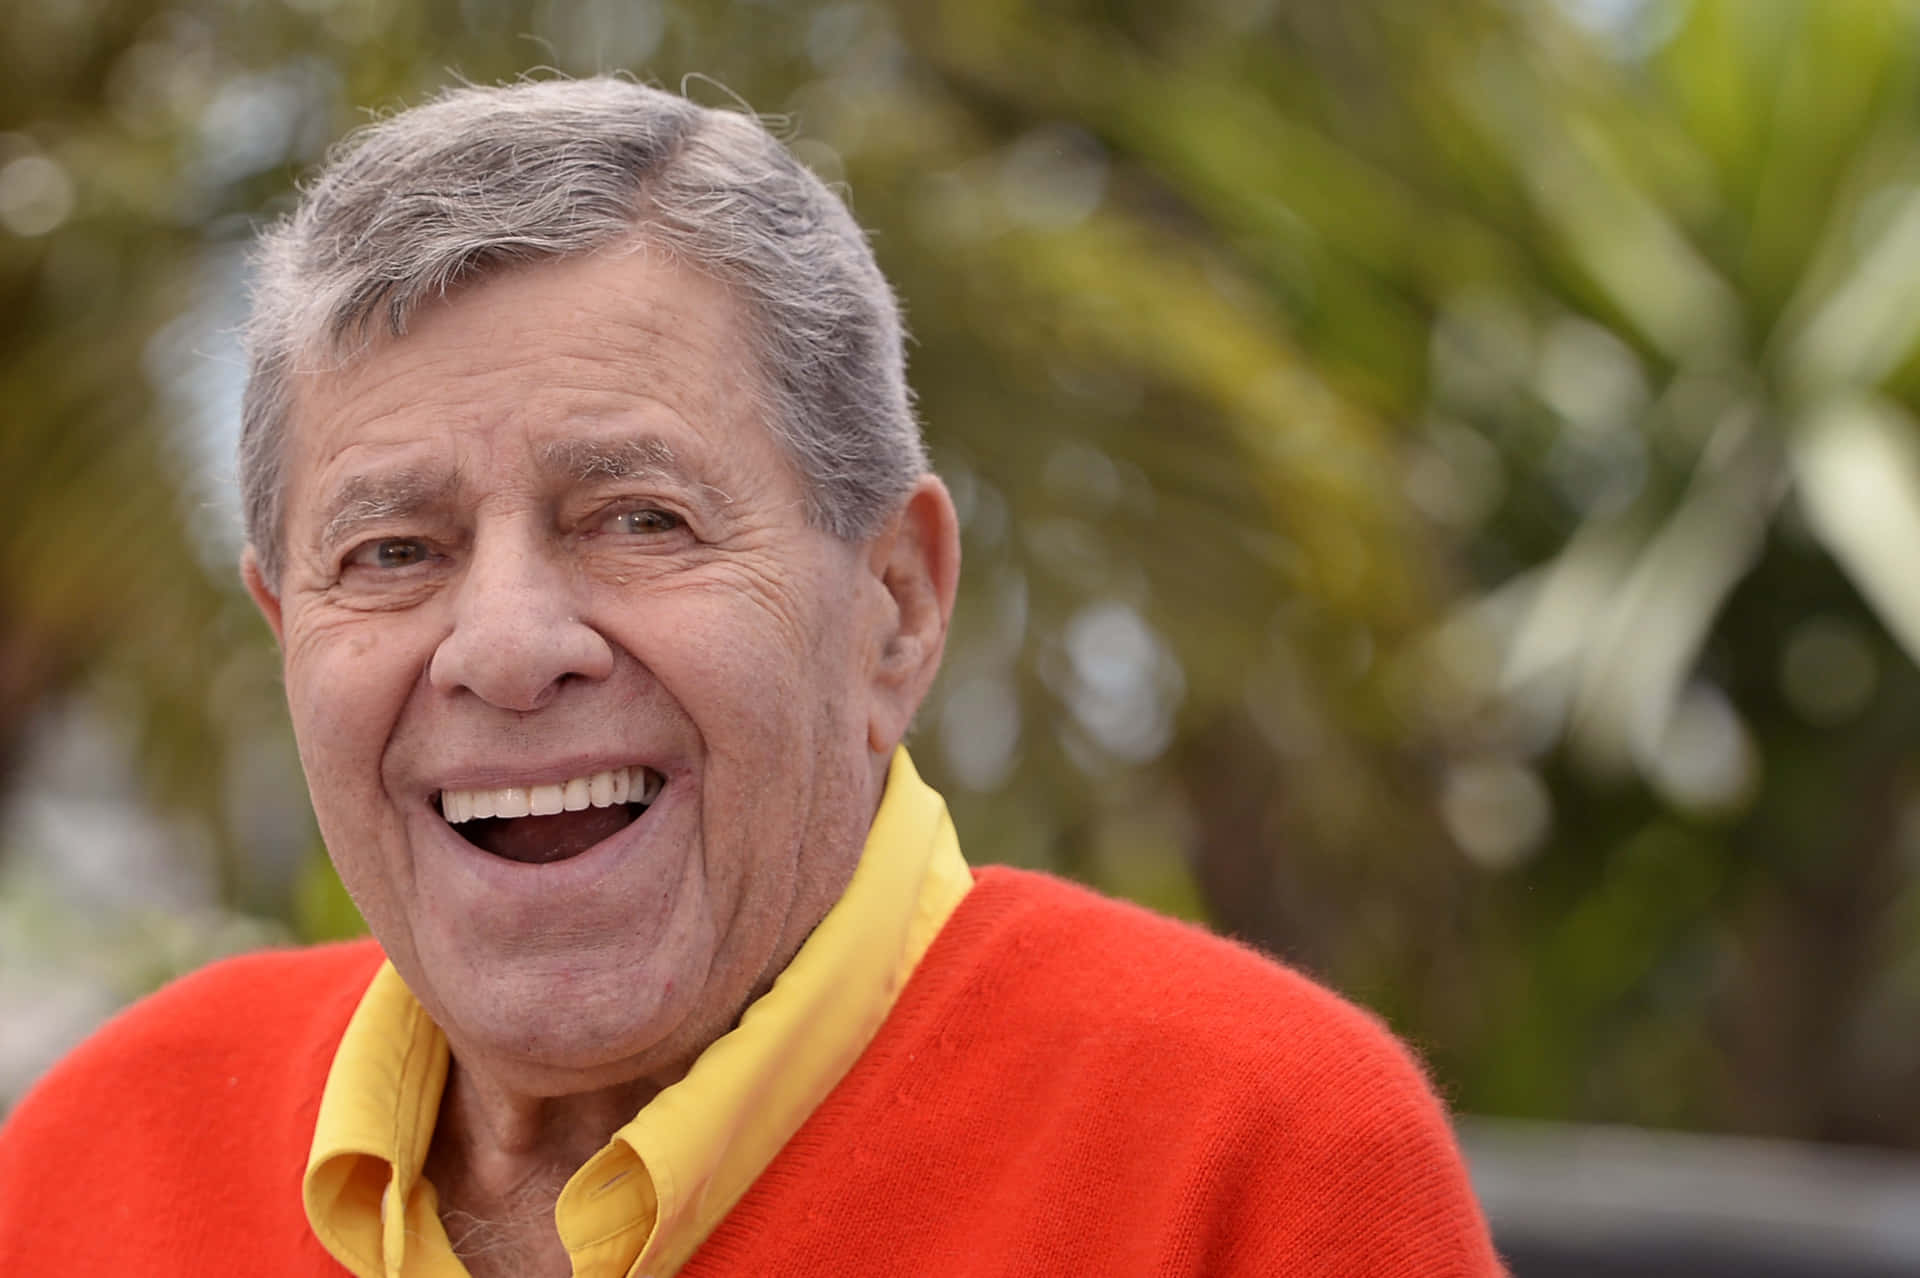 Jerry Lewis Smiling in Vintage Photo Wallpaper